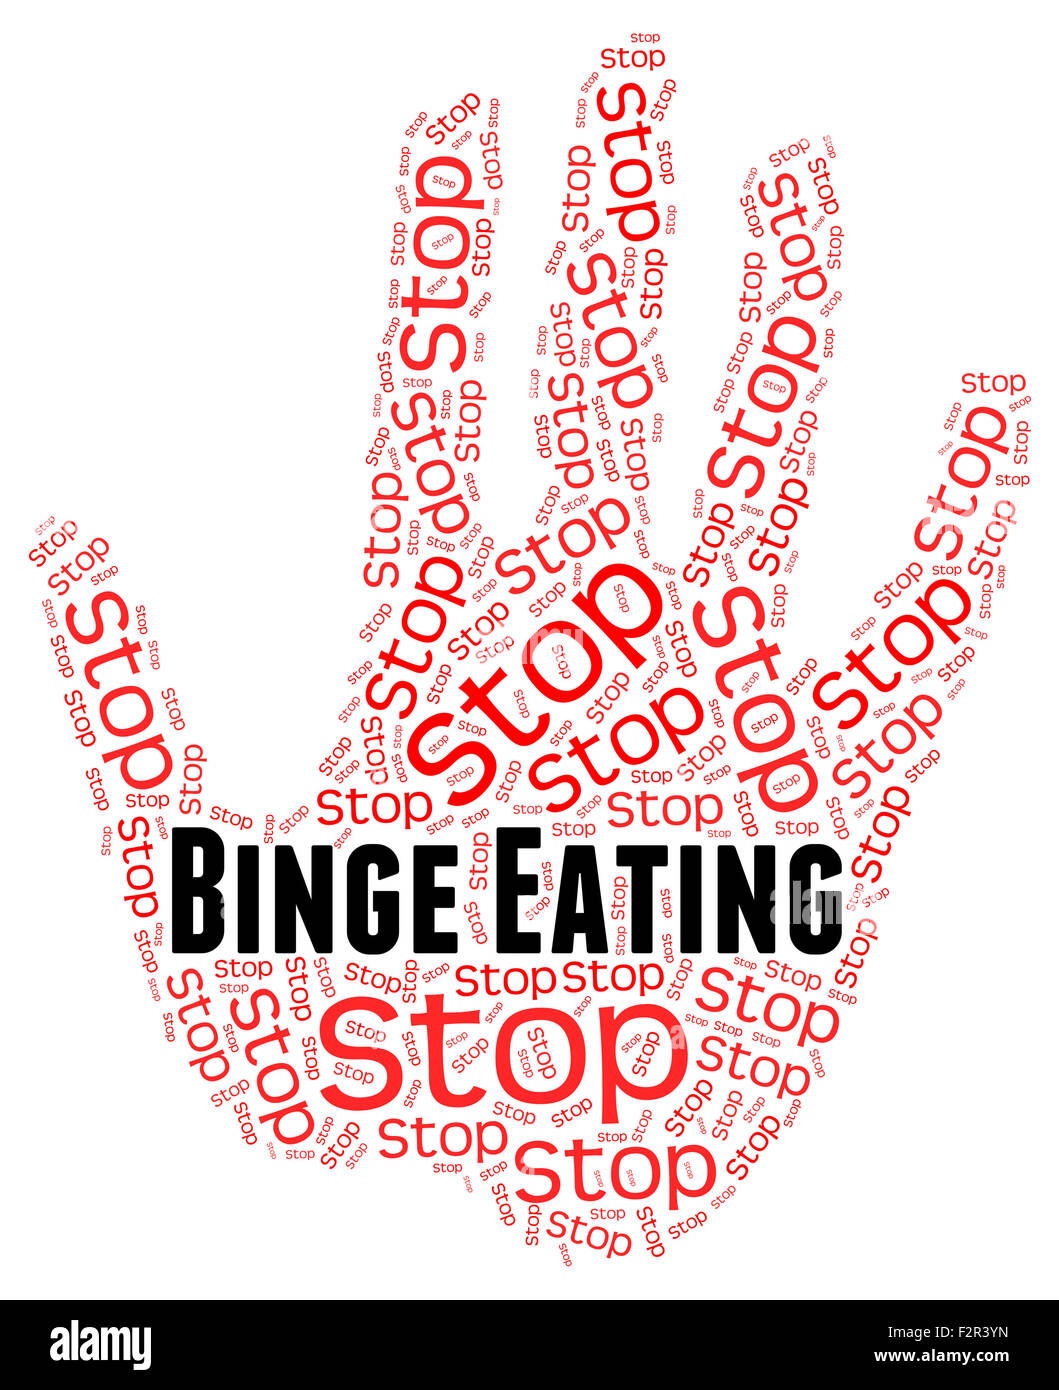 Stop Binge Eating Showing Gobble Down And Overindulgent Stock Photo